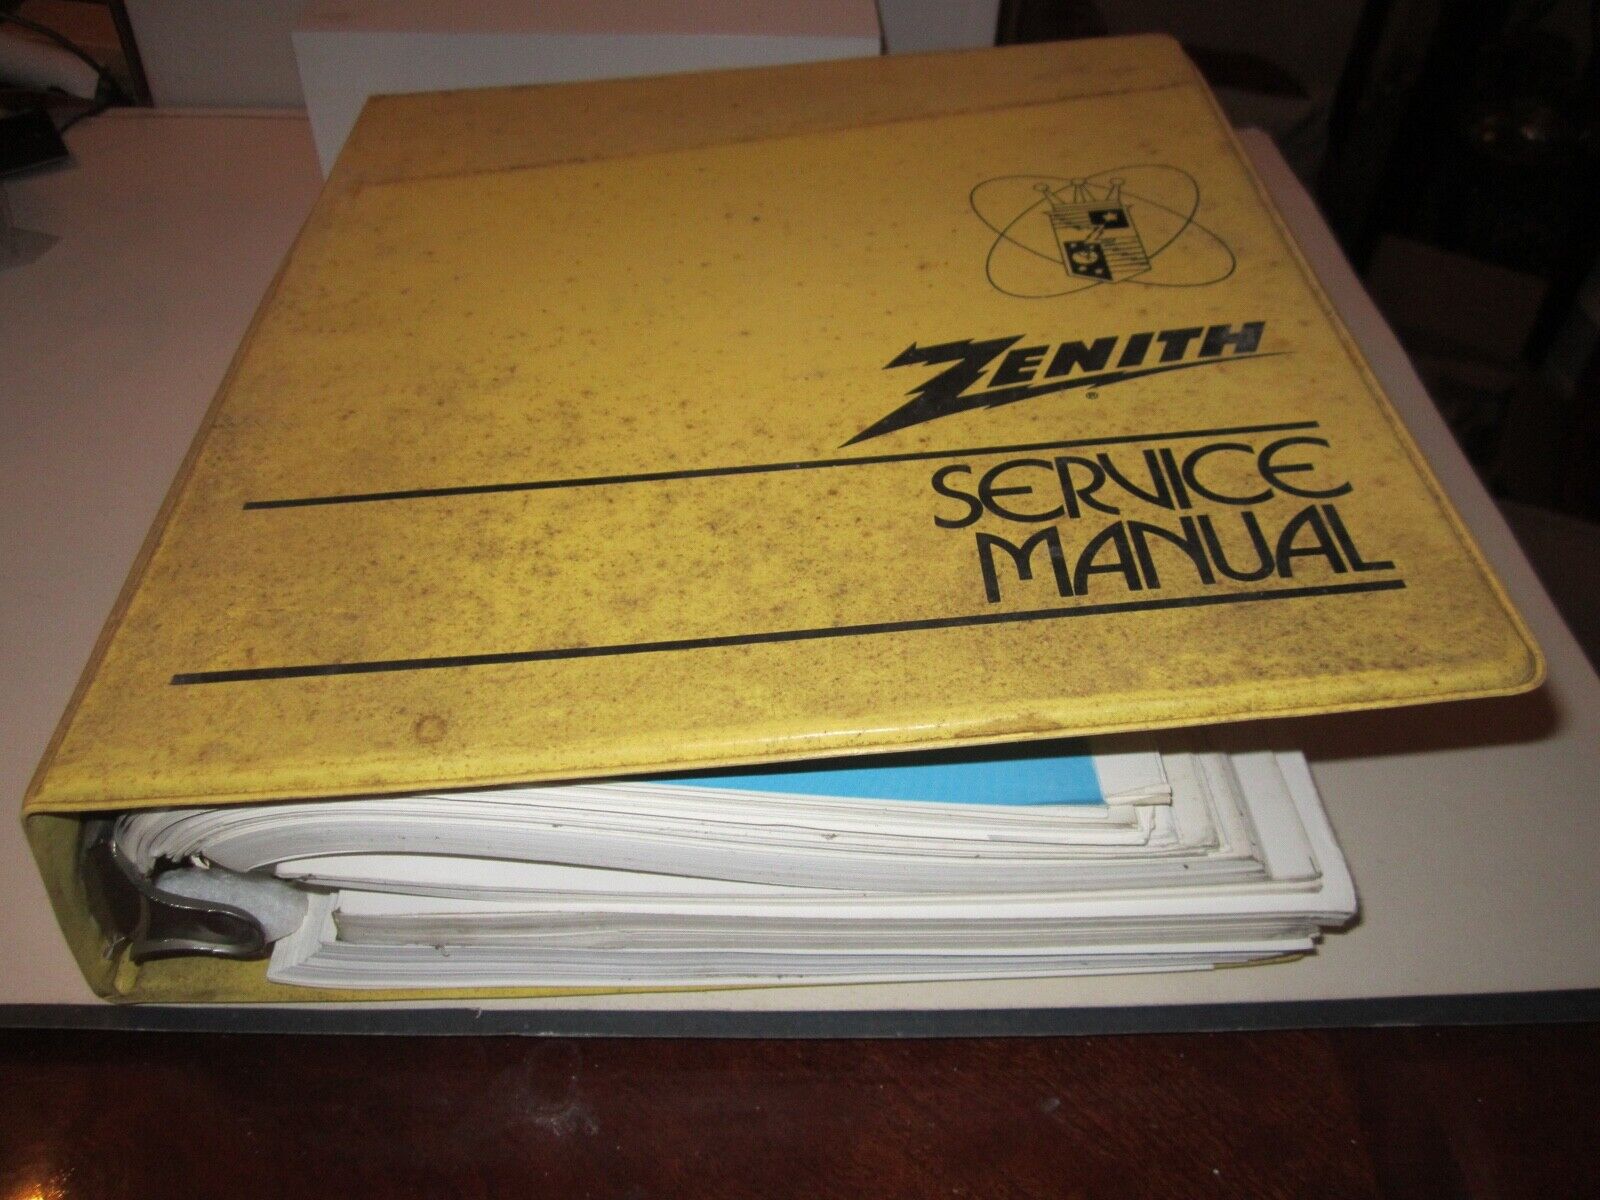 MASSIVE ZENITH SERVICE MANUAL BINDER FULL OF MANUALS - EARLY 1970\'S